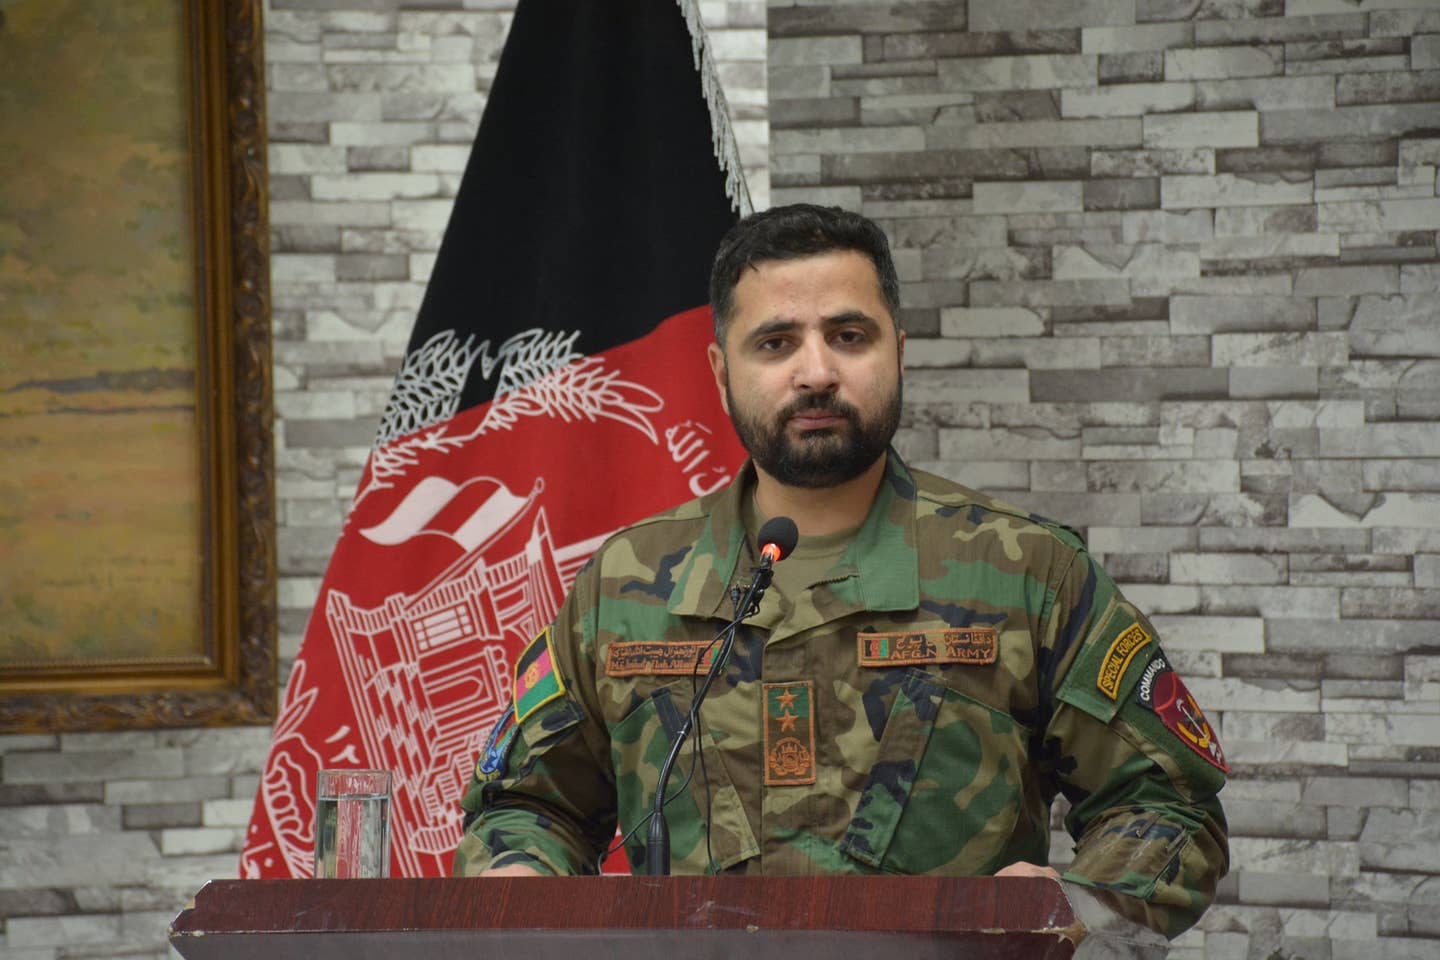 Despite his protests, Haibatullah Alizai was named Chief of the General Staff of the Afghan army on Aug. 11, 2021. (Photo courtesy Haibatullah Alizai)